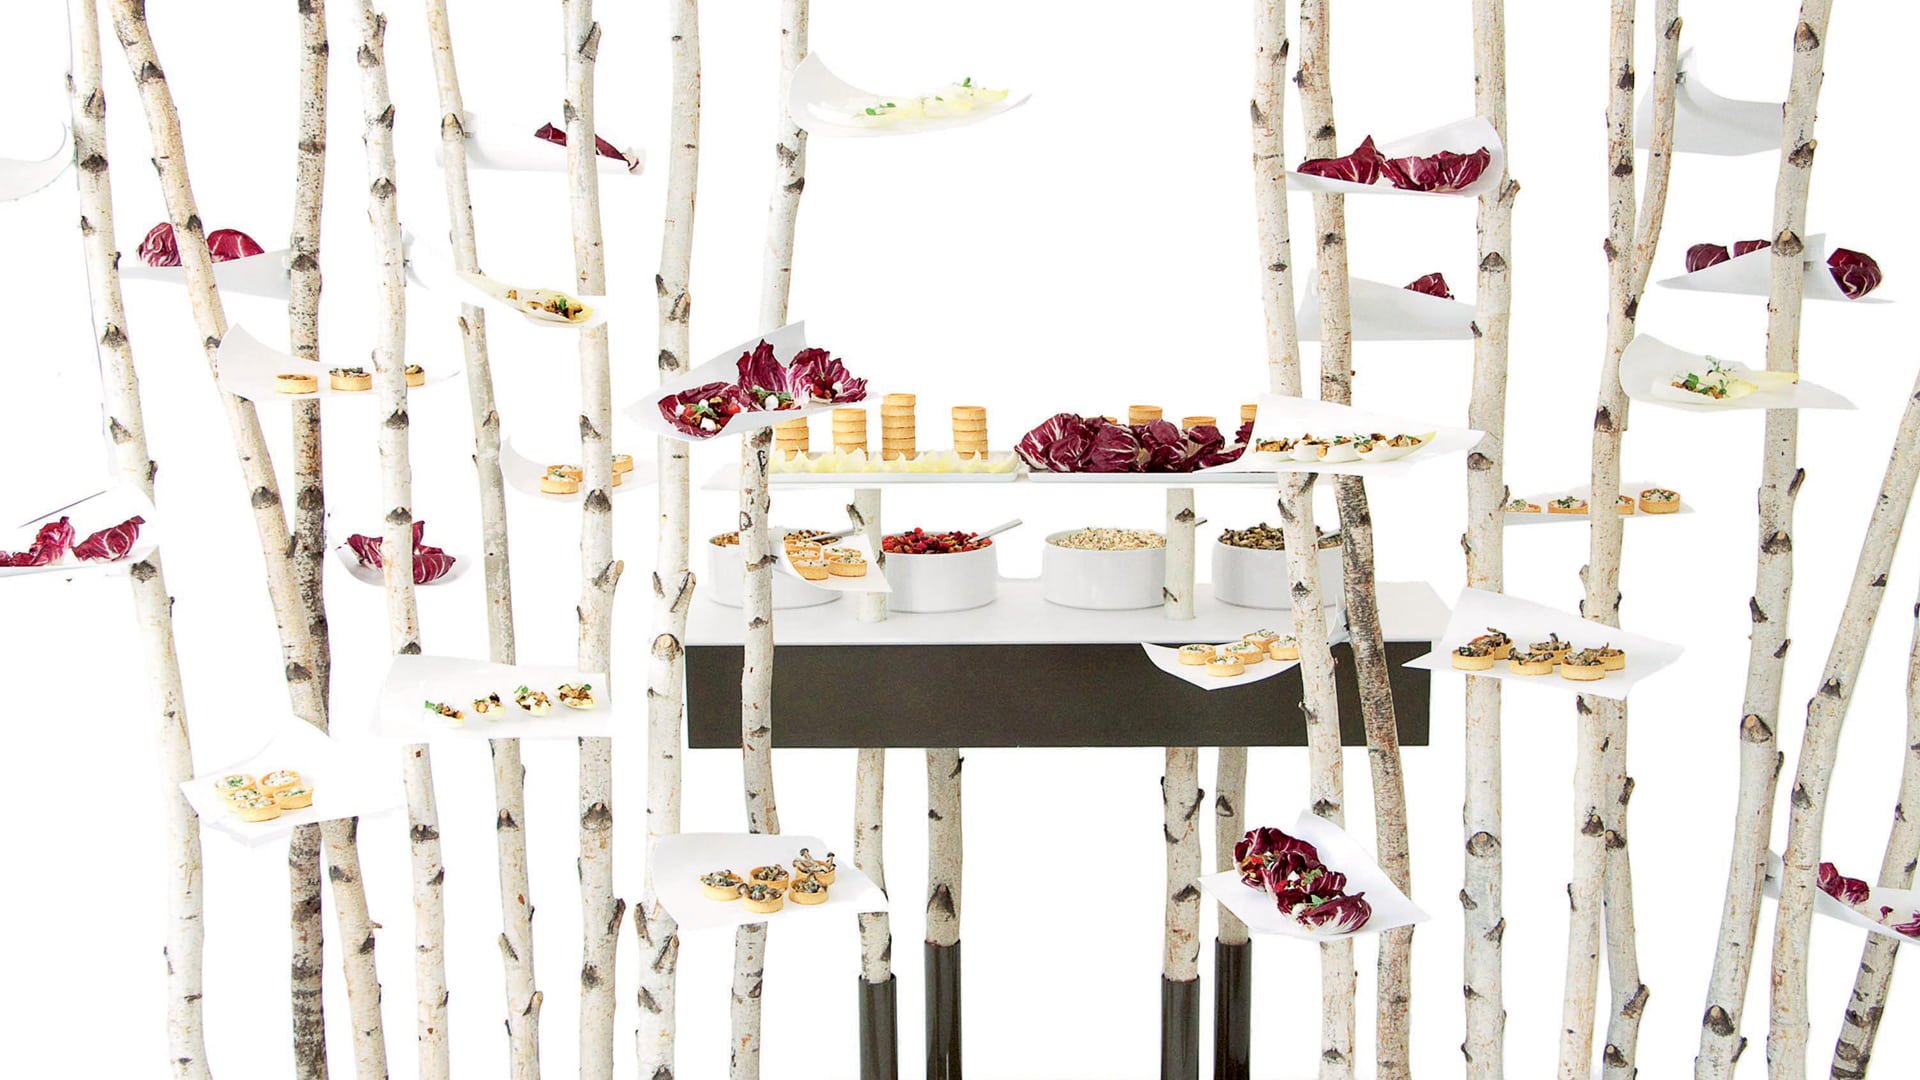 Photo of small plate food items beautifully displayed with birch trees